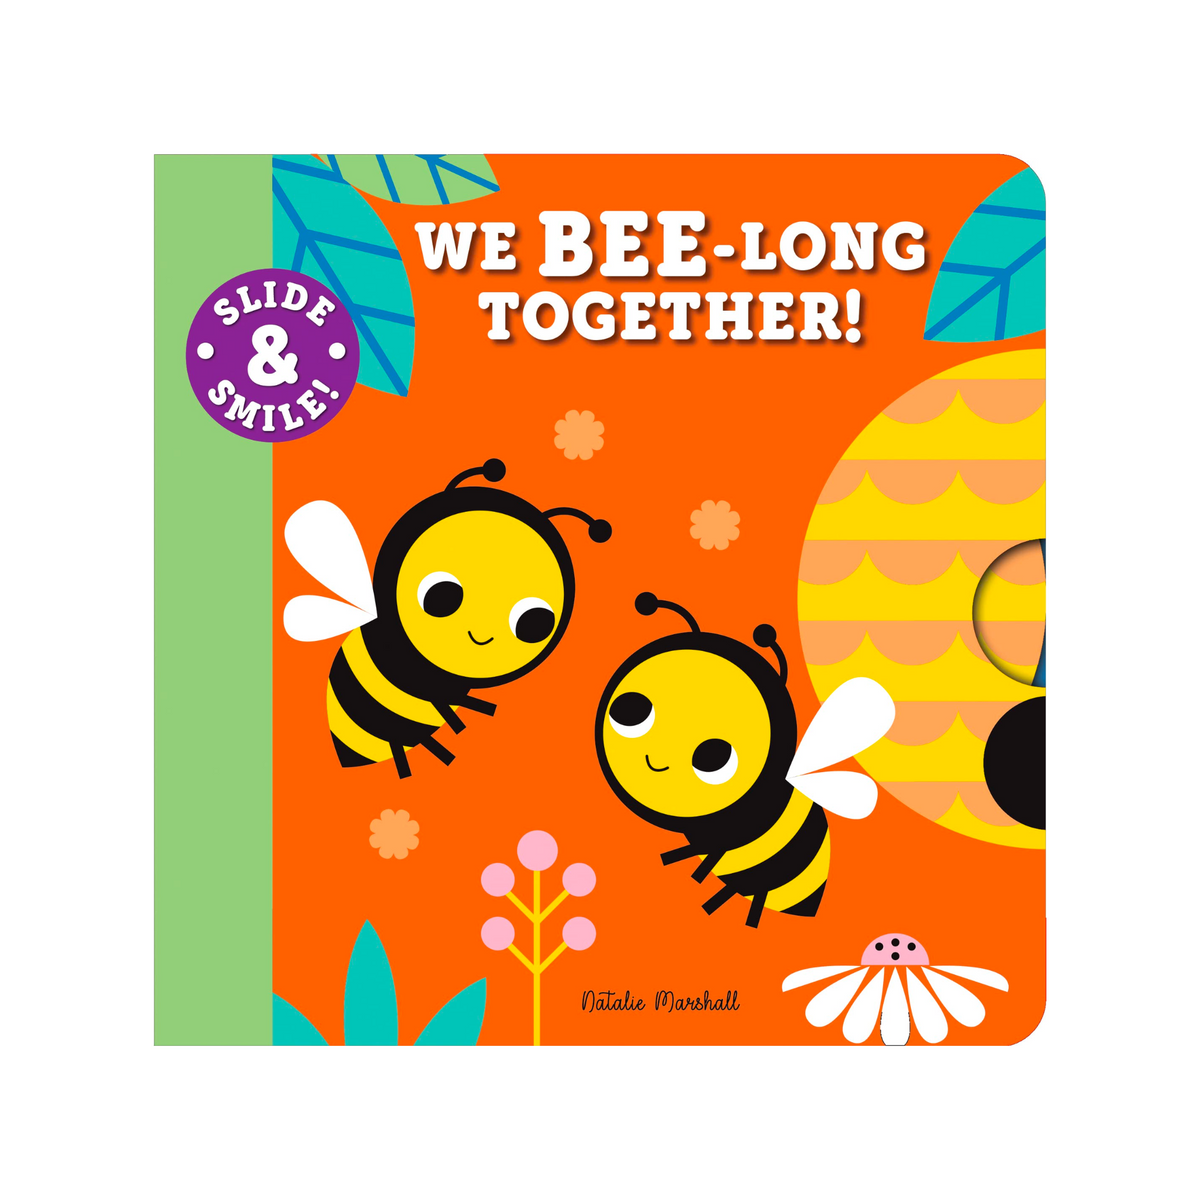 Slide and Smile: We Bee-Long Together! Book